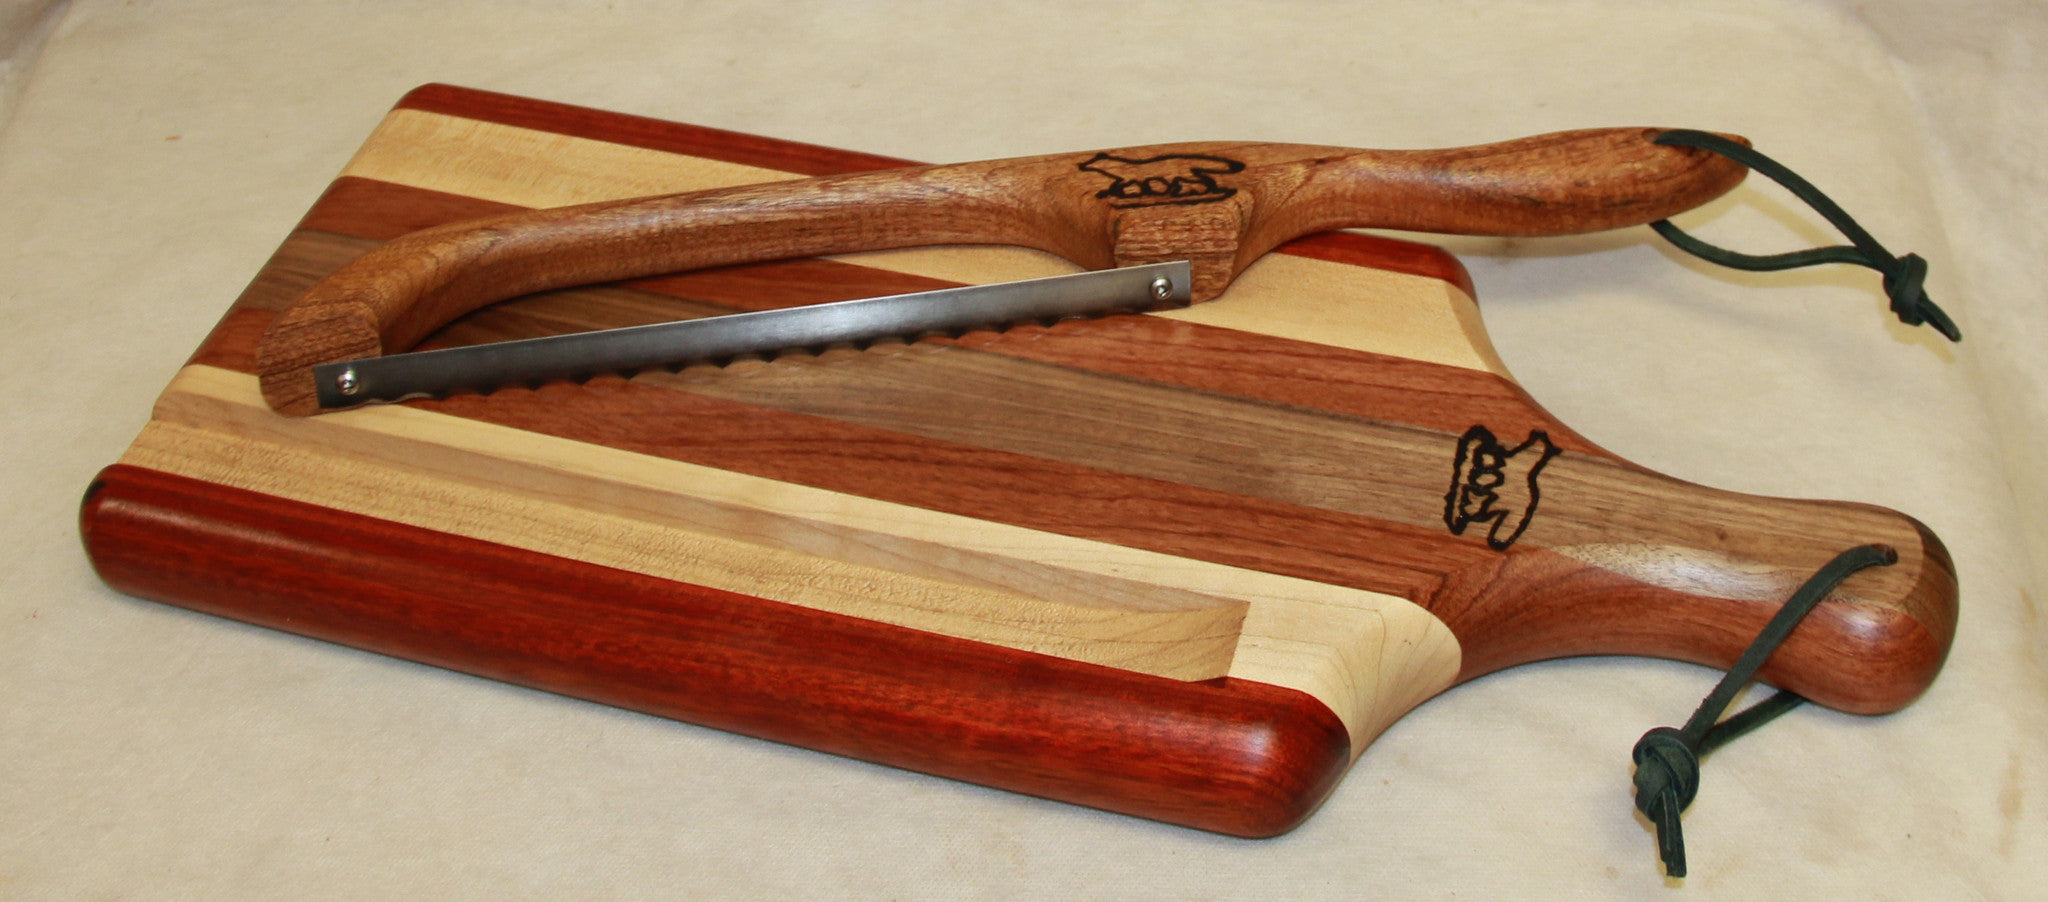 Cutting board--Exotic Wood Stripes Board and Bow Knife